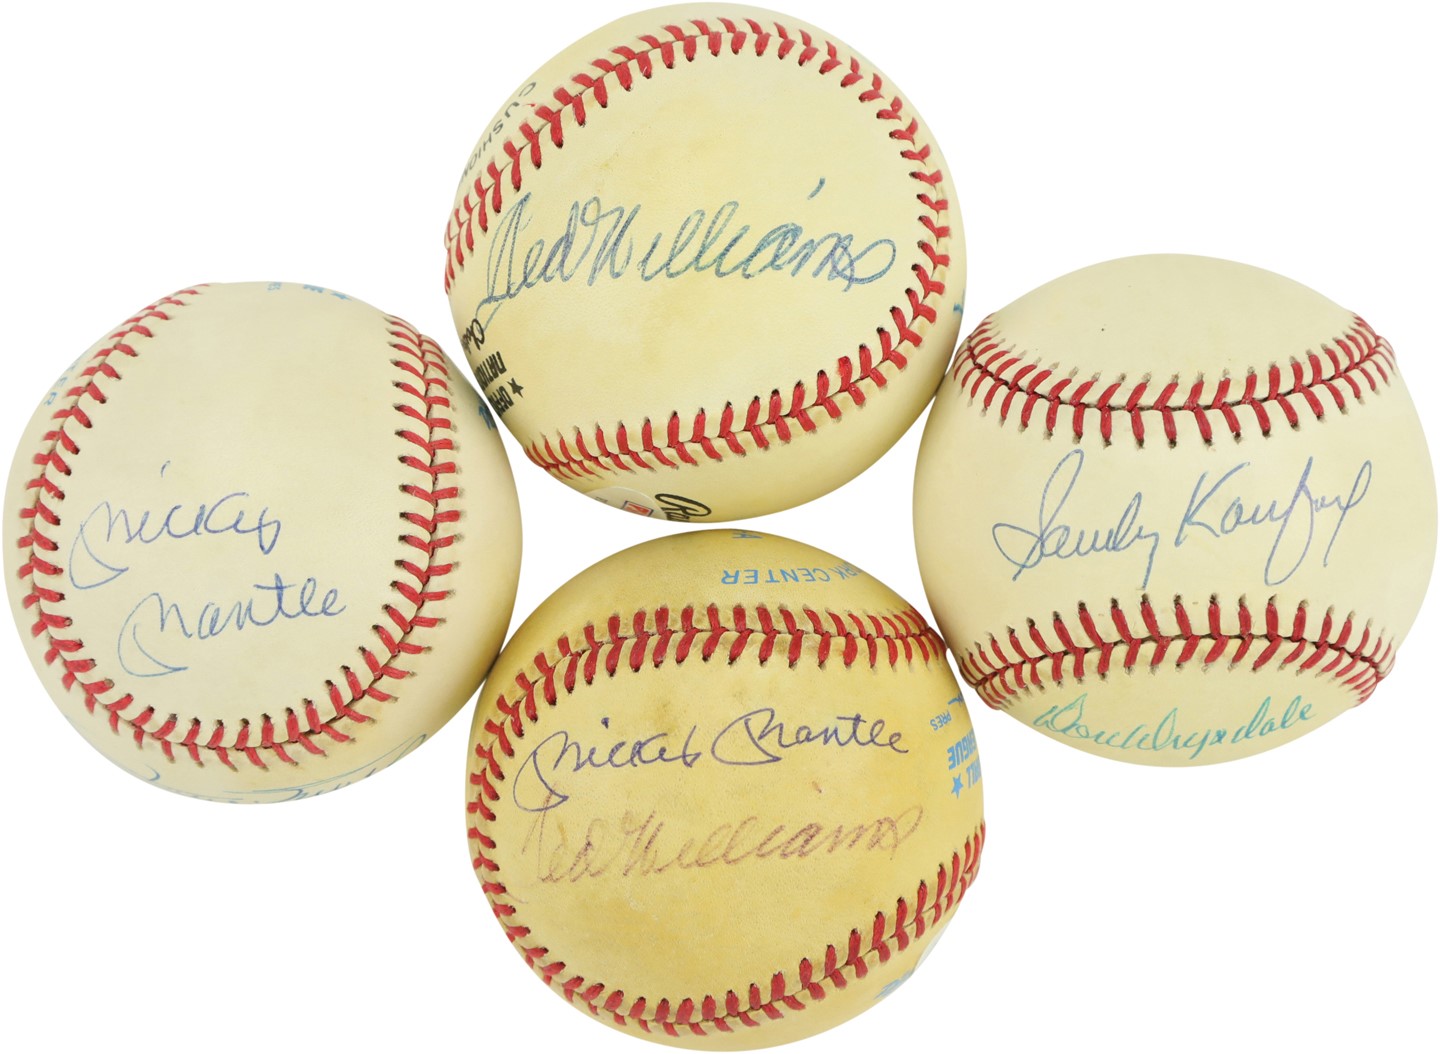 - Important Hall of Famers Signed Baseball Quartet with Triple Crown (PSA)